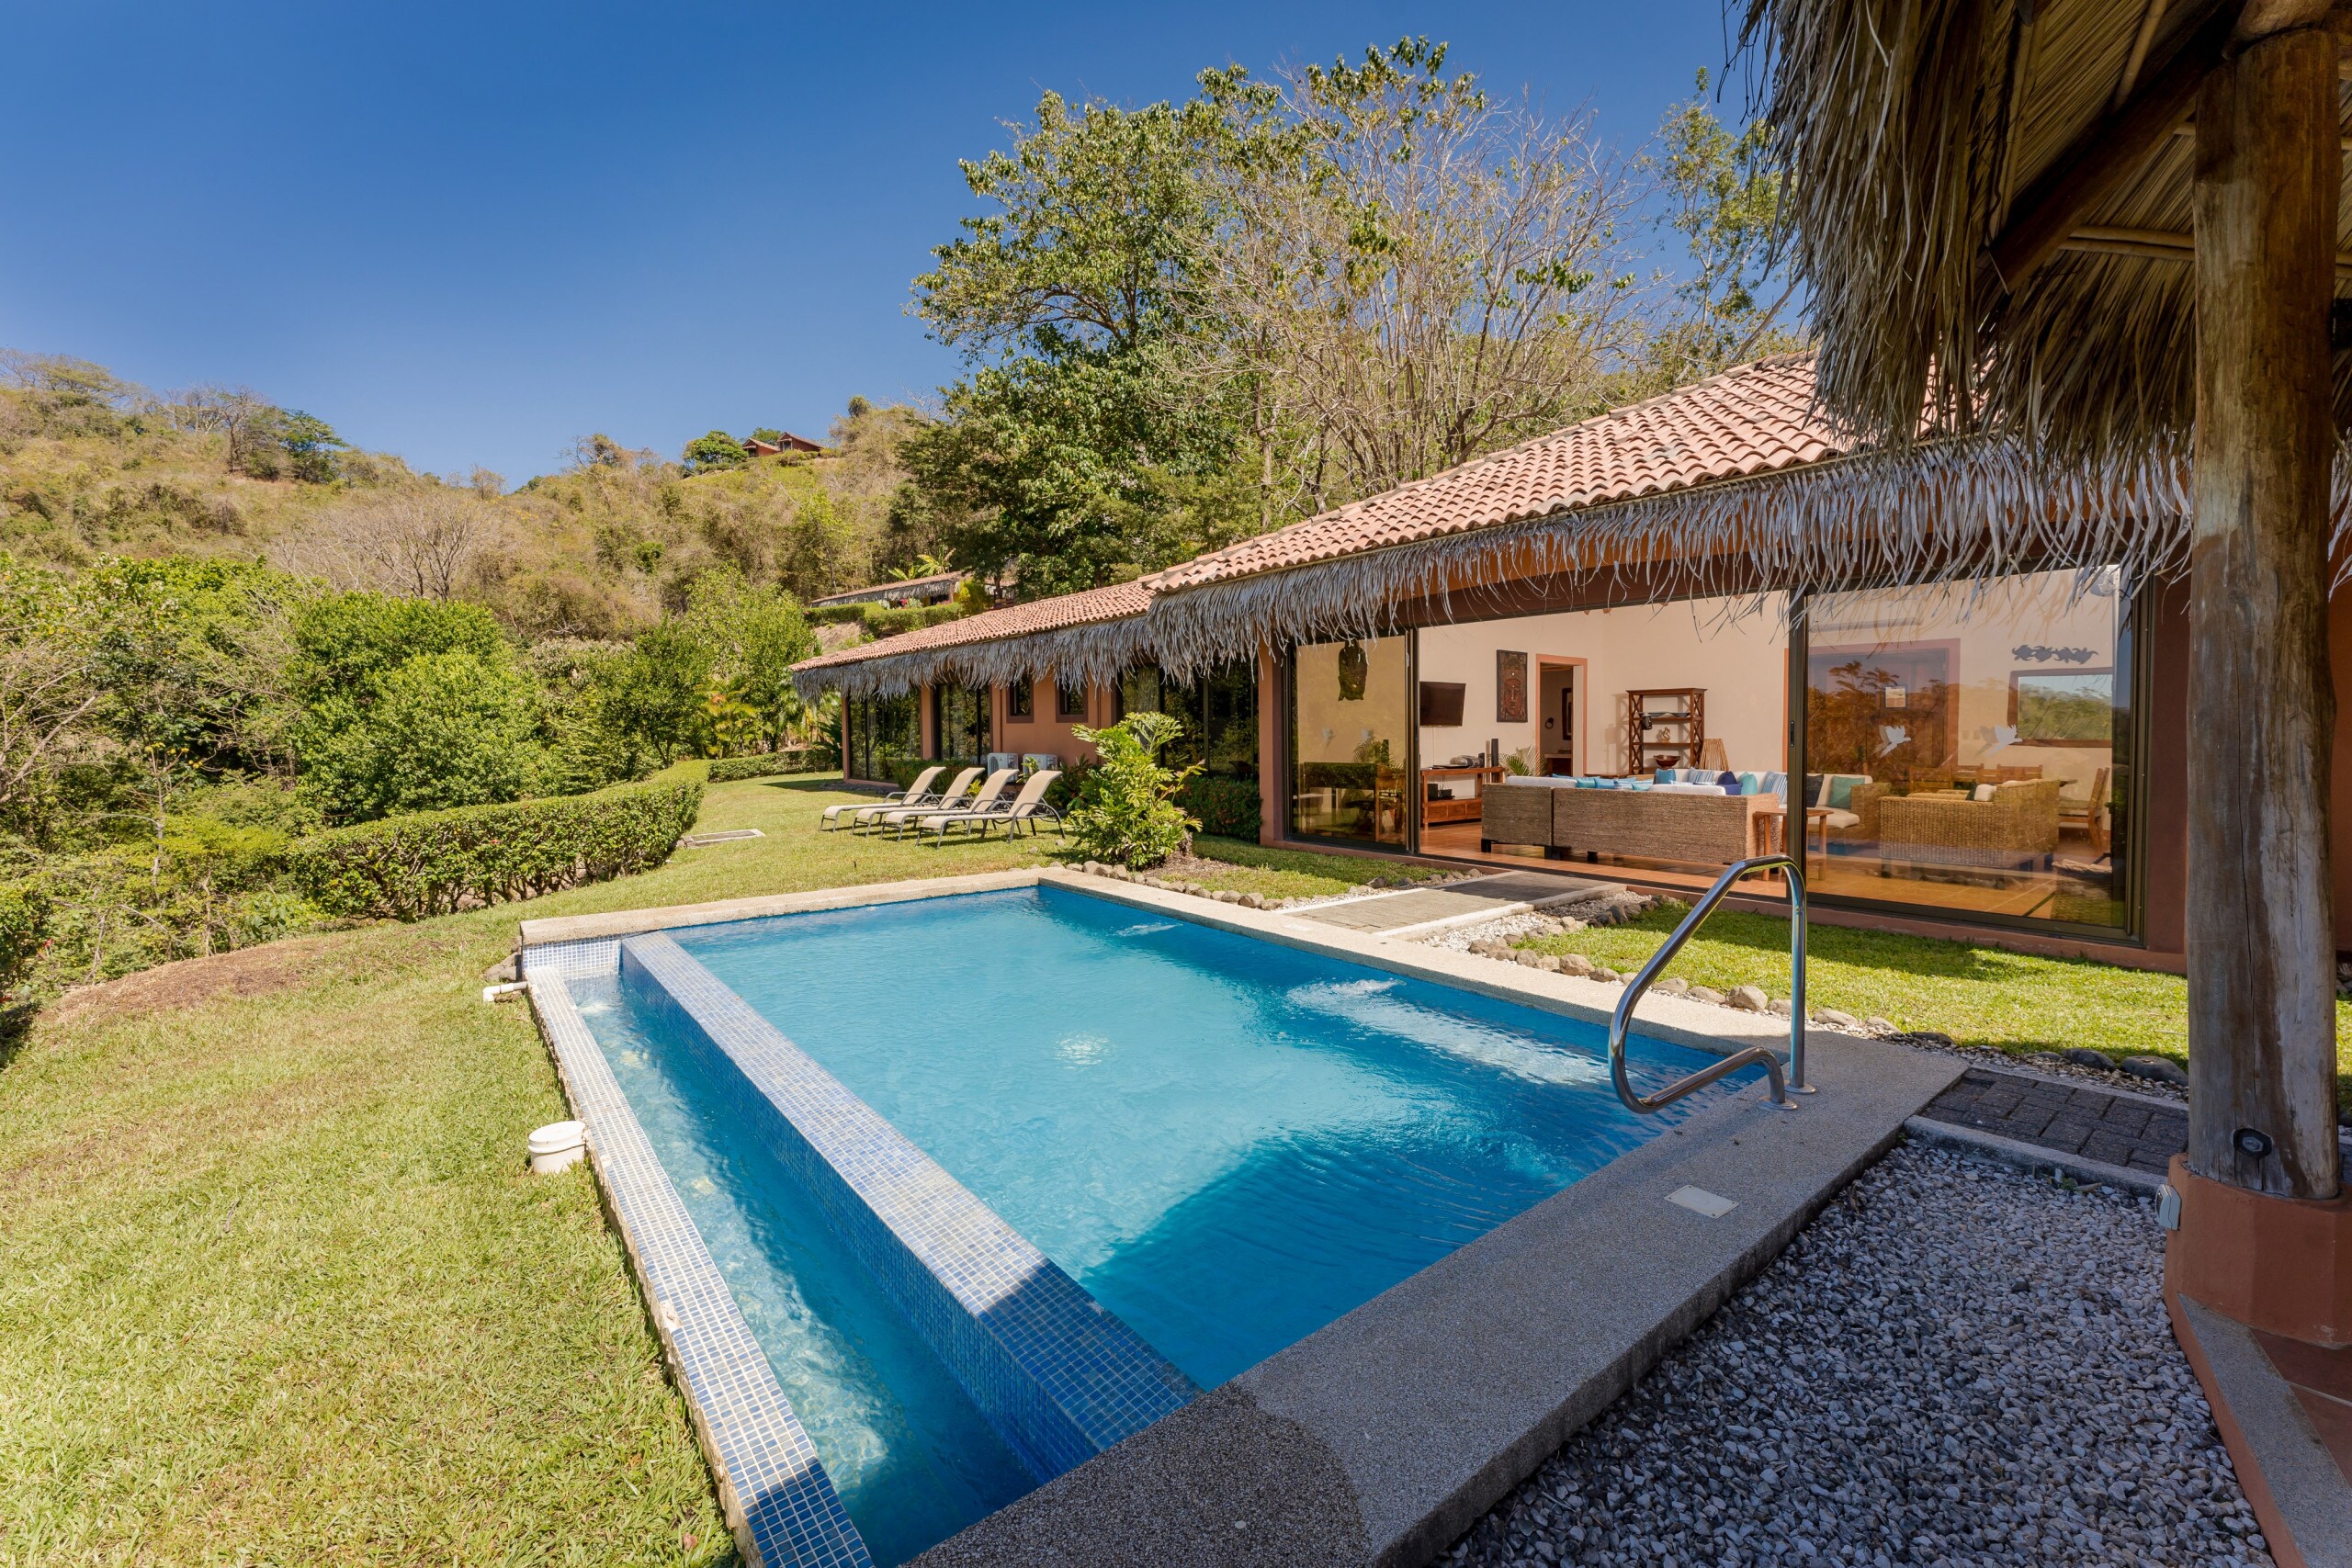 Property Image 2 - Cedros, charming, private, and rustic-style 3 bedroom villa in the middle of jungle